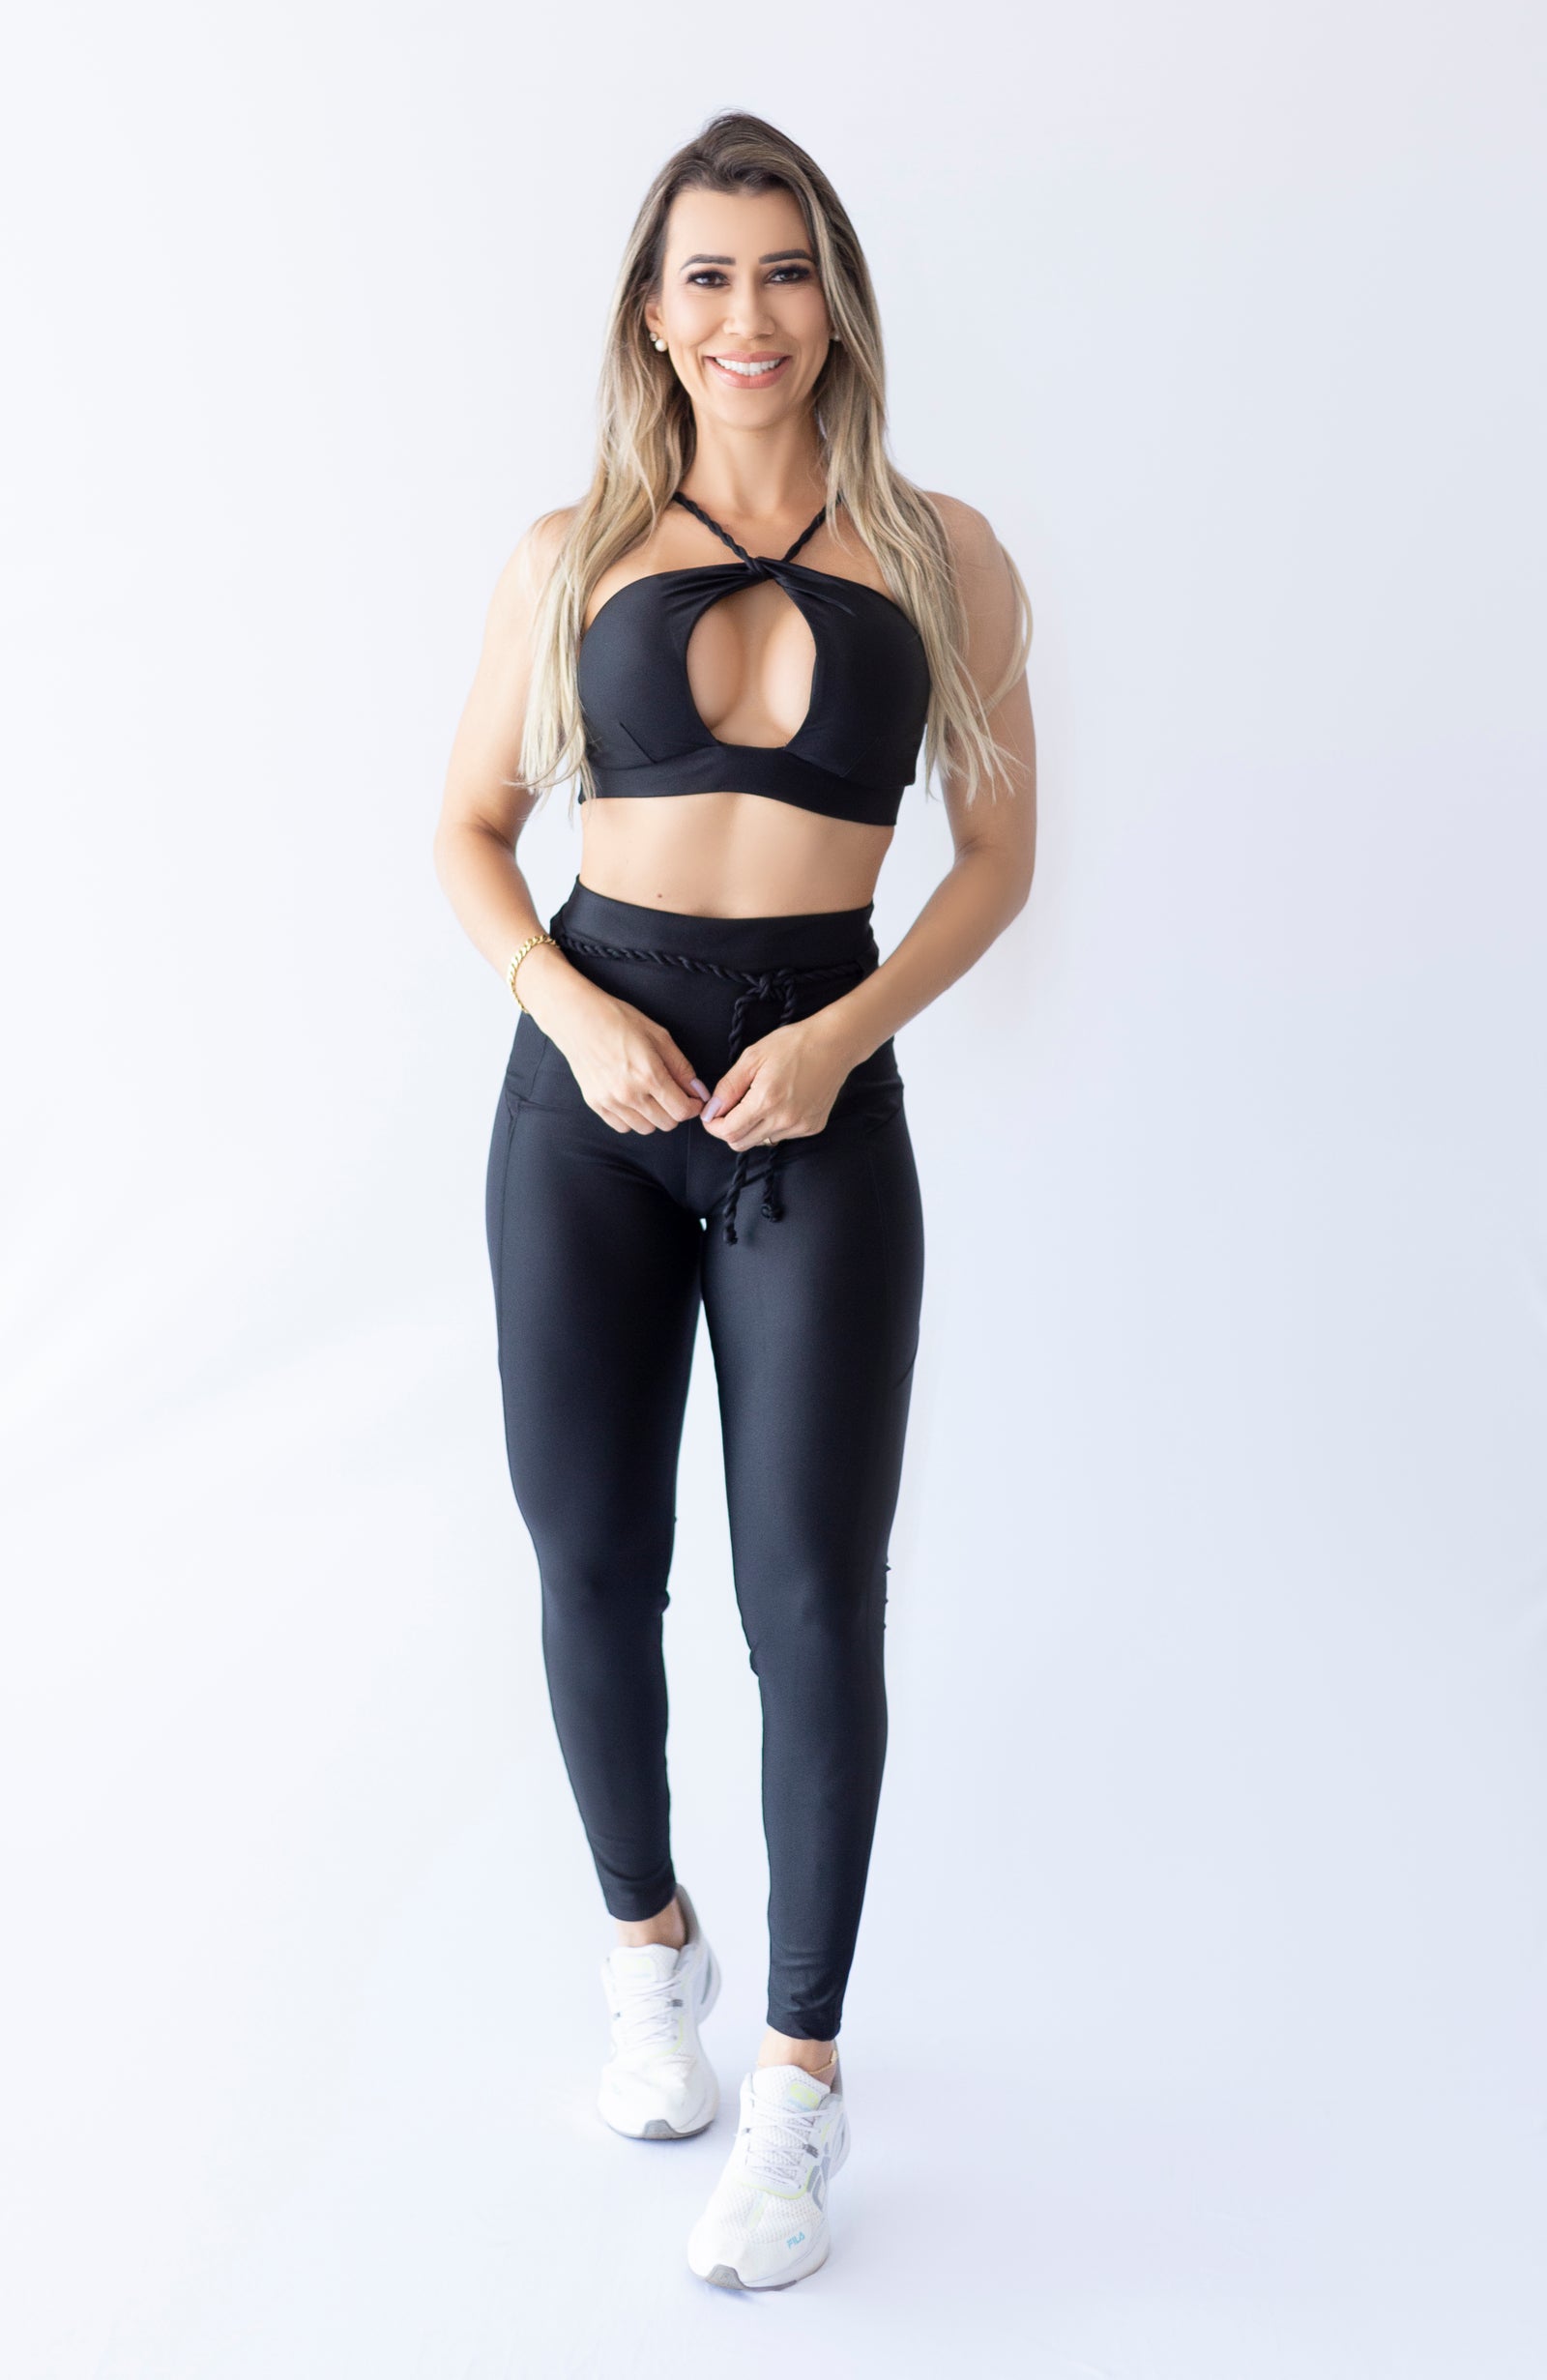 Brazilian Honeycomb Leggings are the Bees Knees of 2019 - Lure Fitness